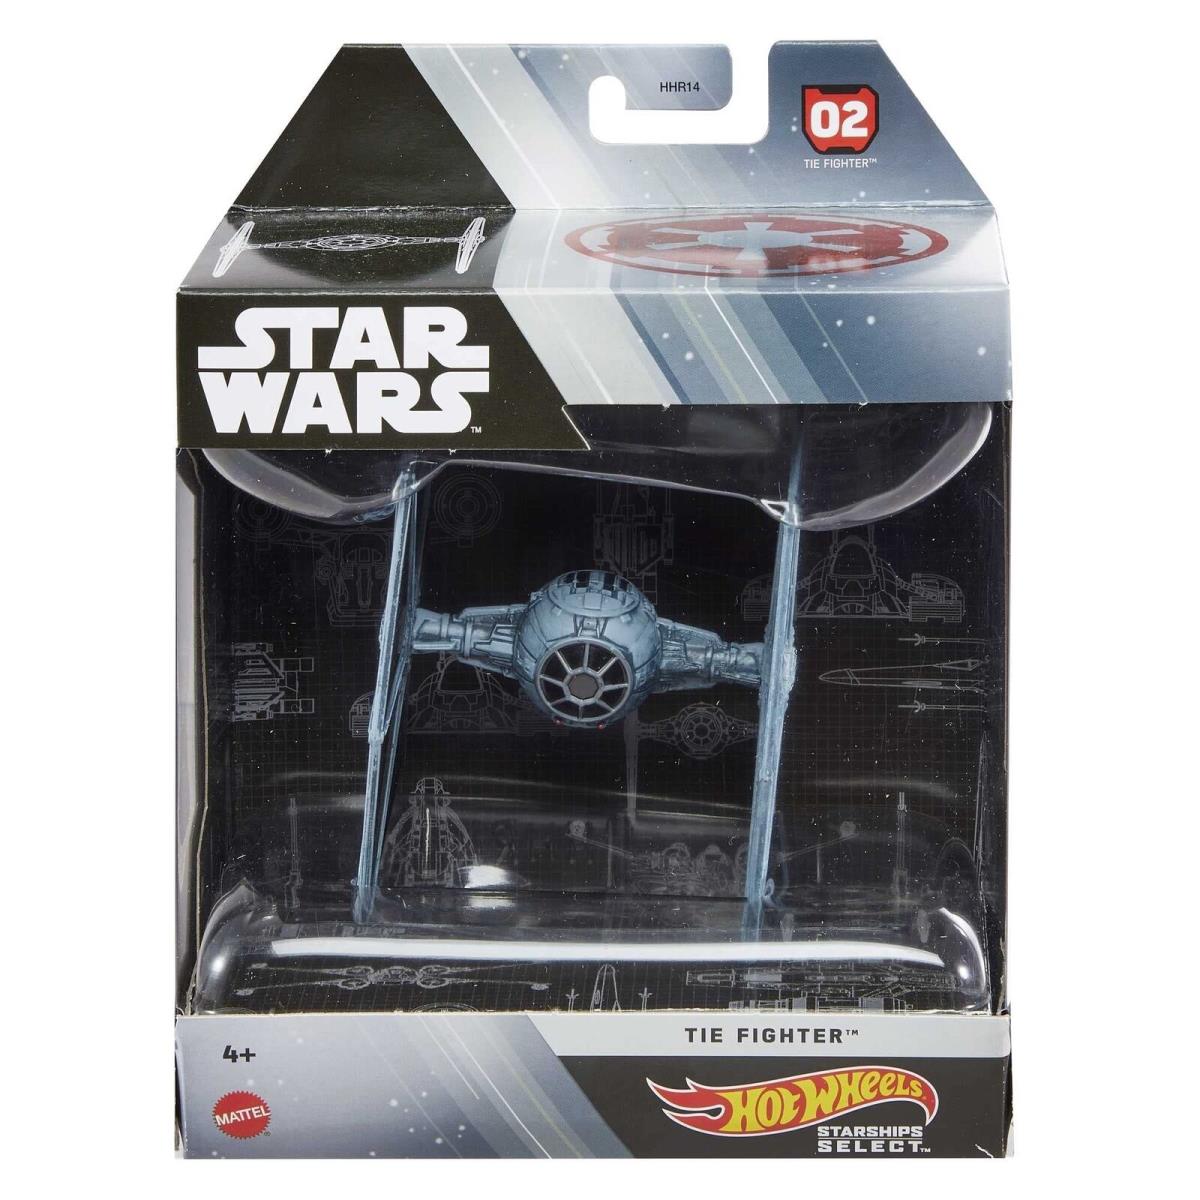 Hot Wheels Star Wars Starships Select Premium Gift For Adults - 